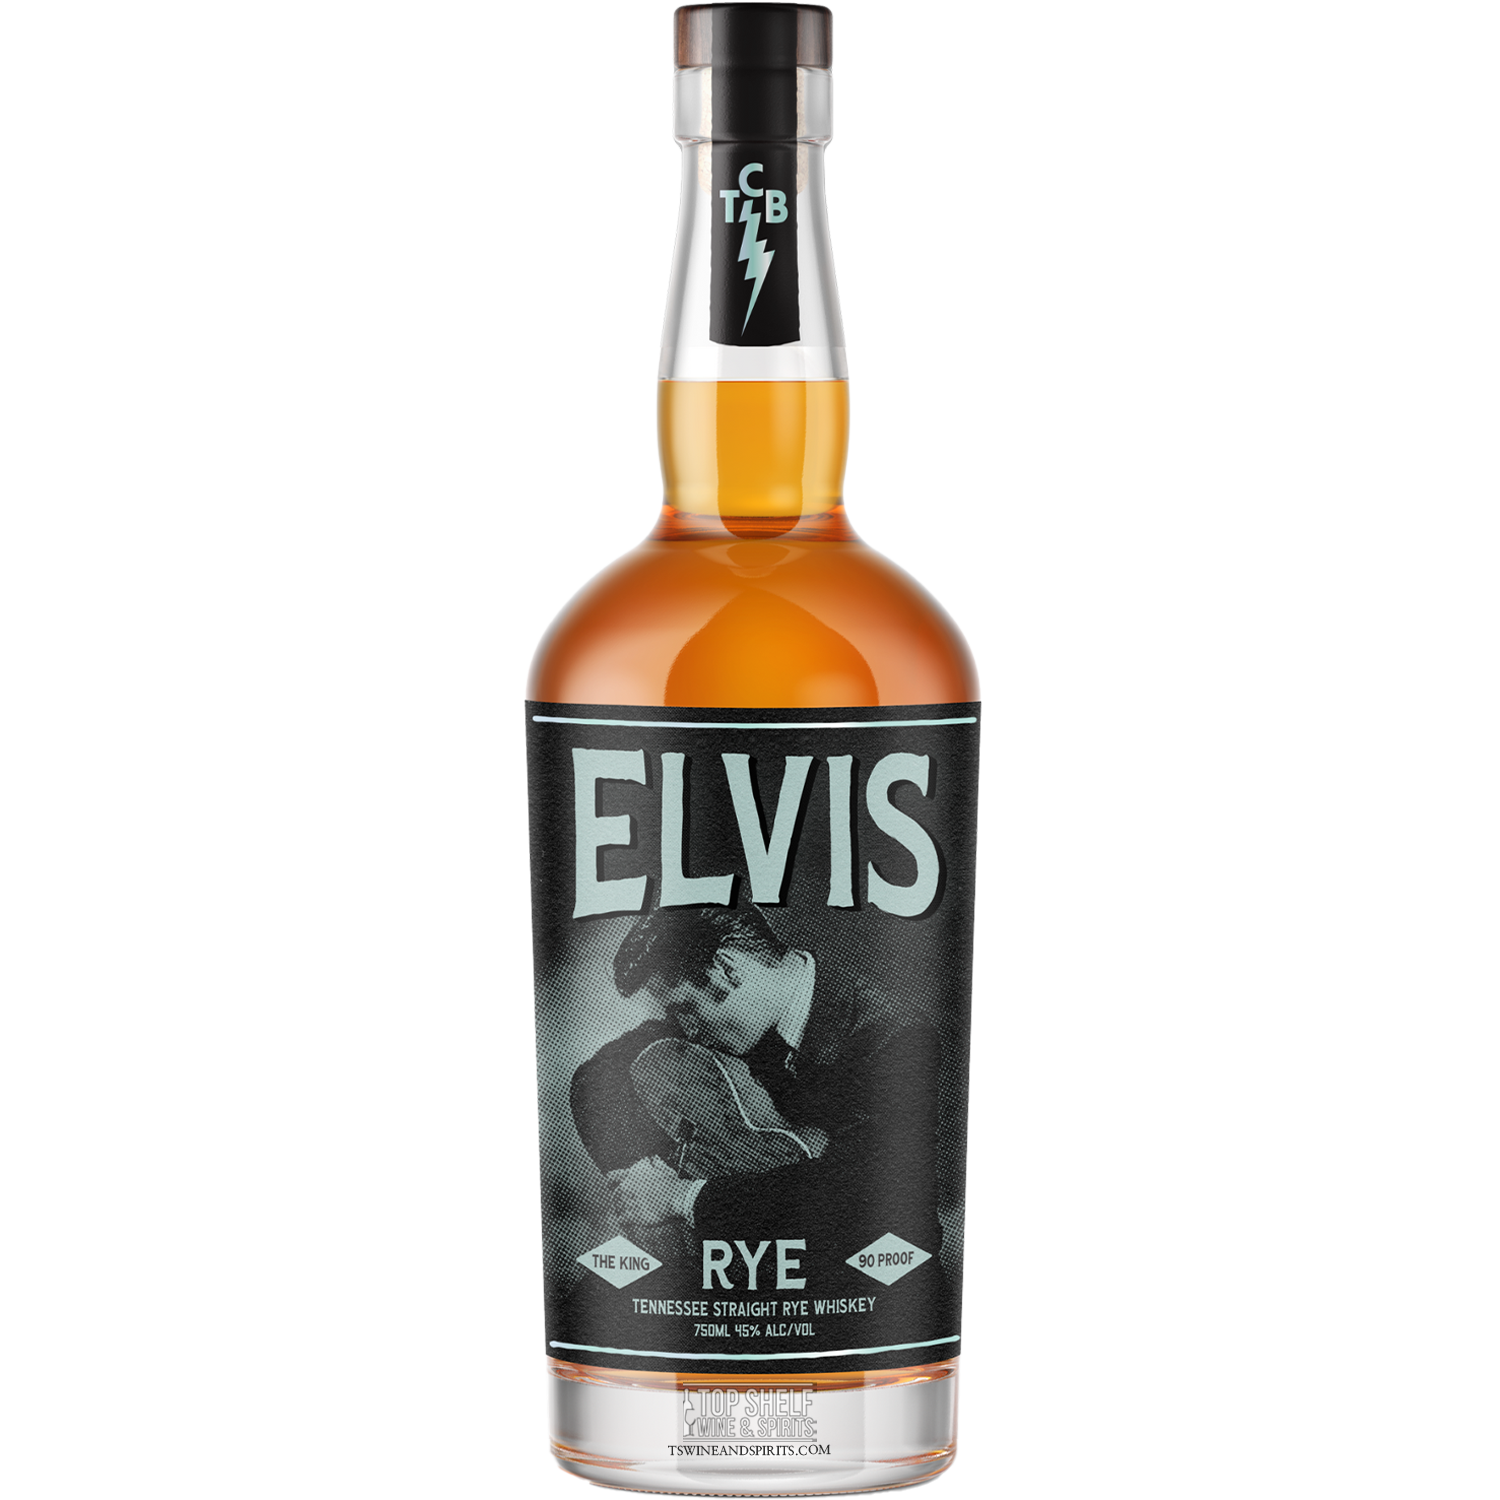 Elvis The King Straight Rye Tennessee Whiskey